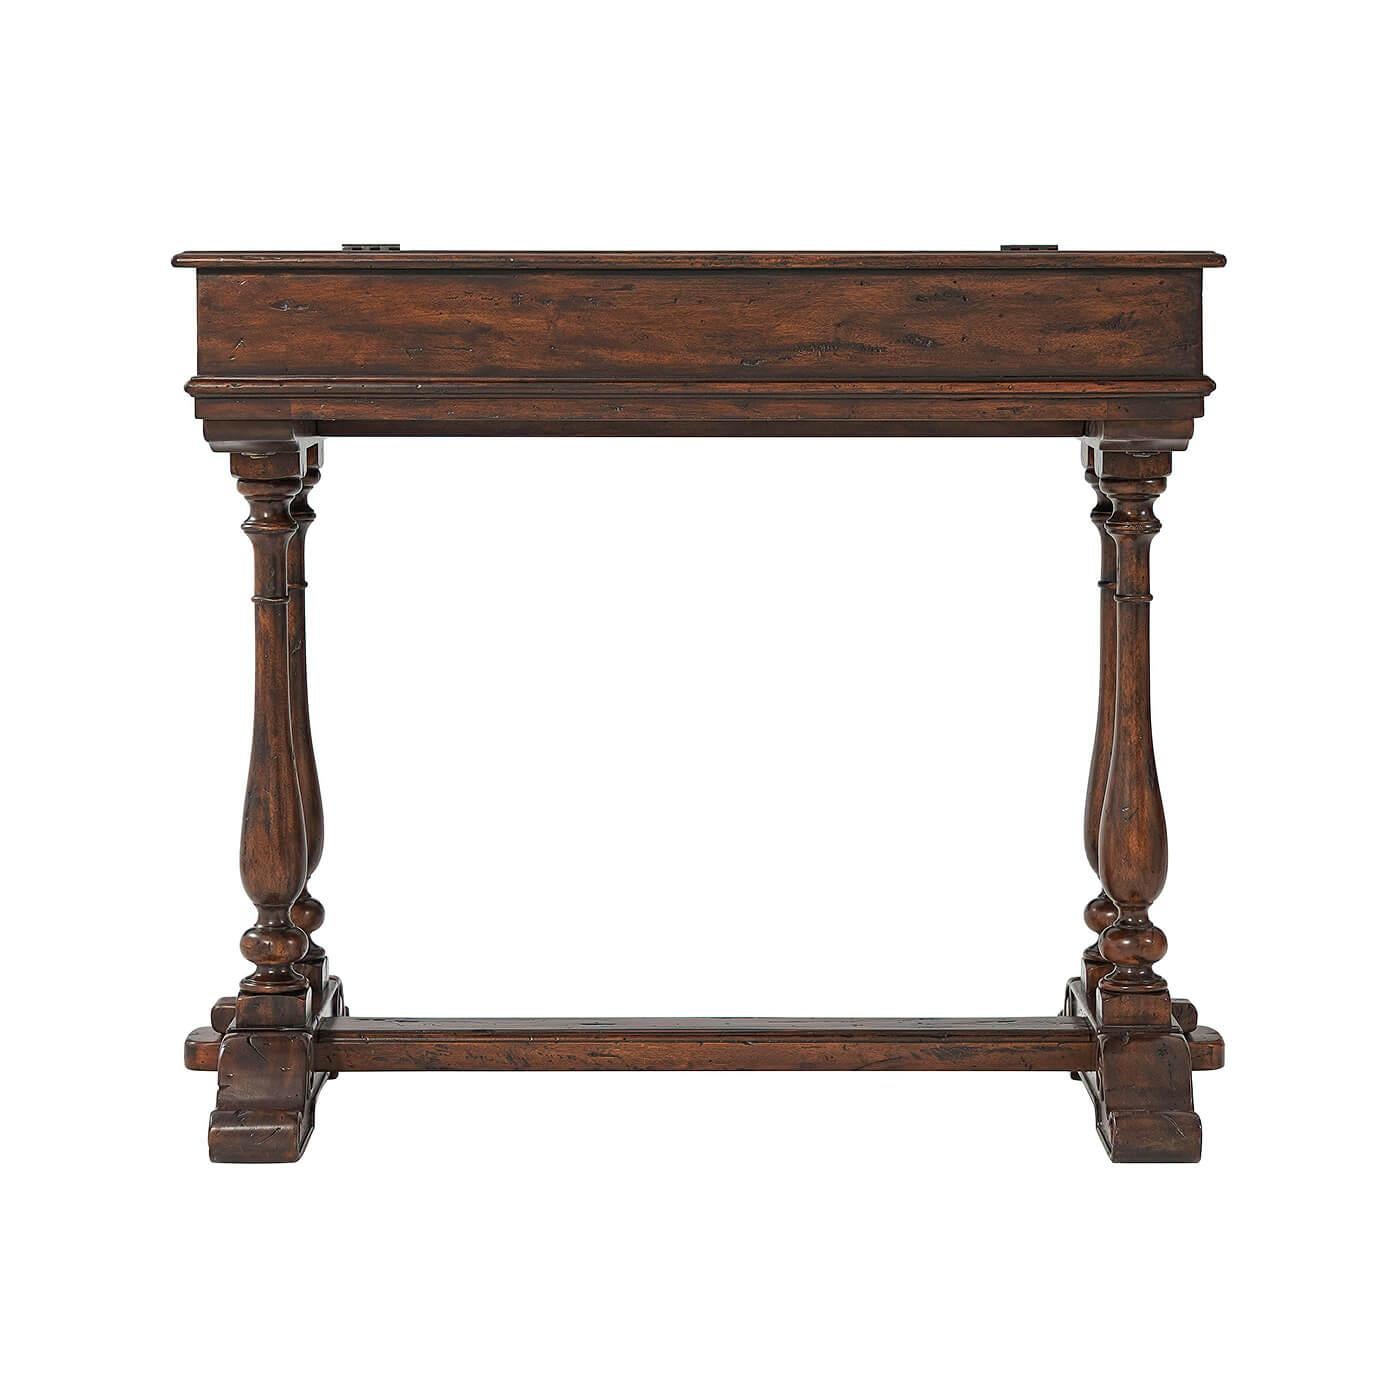 Contemporary Antiqued Wood Fold-Over Rustic Desk For Sale